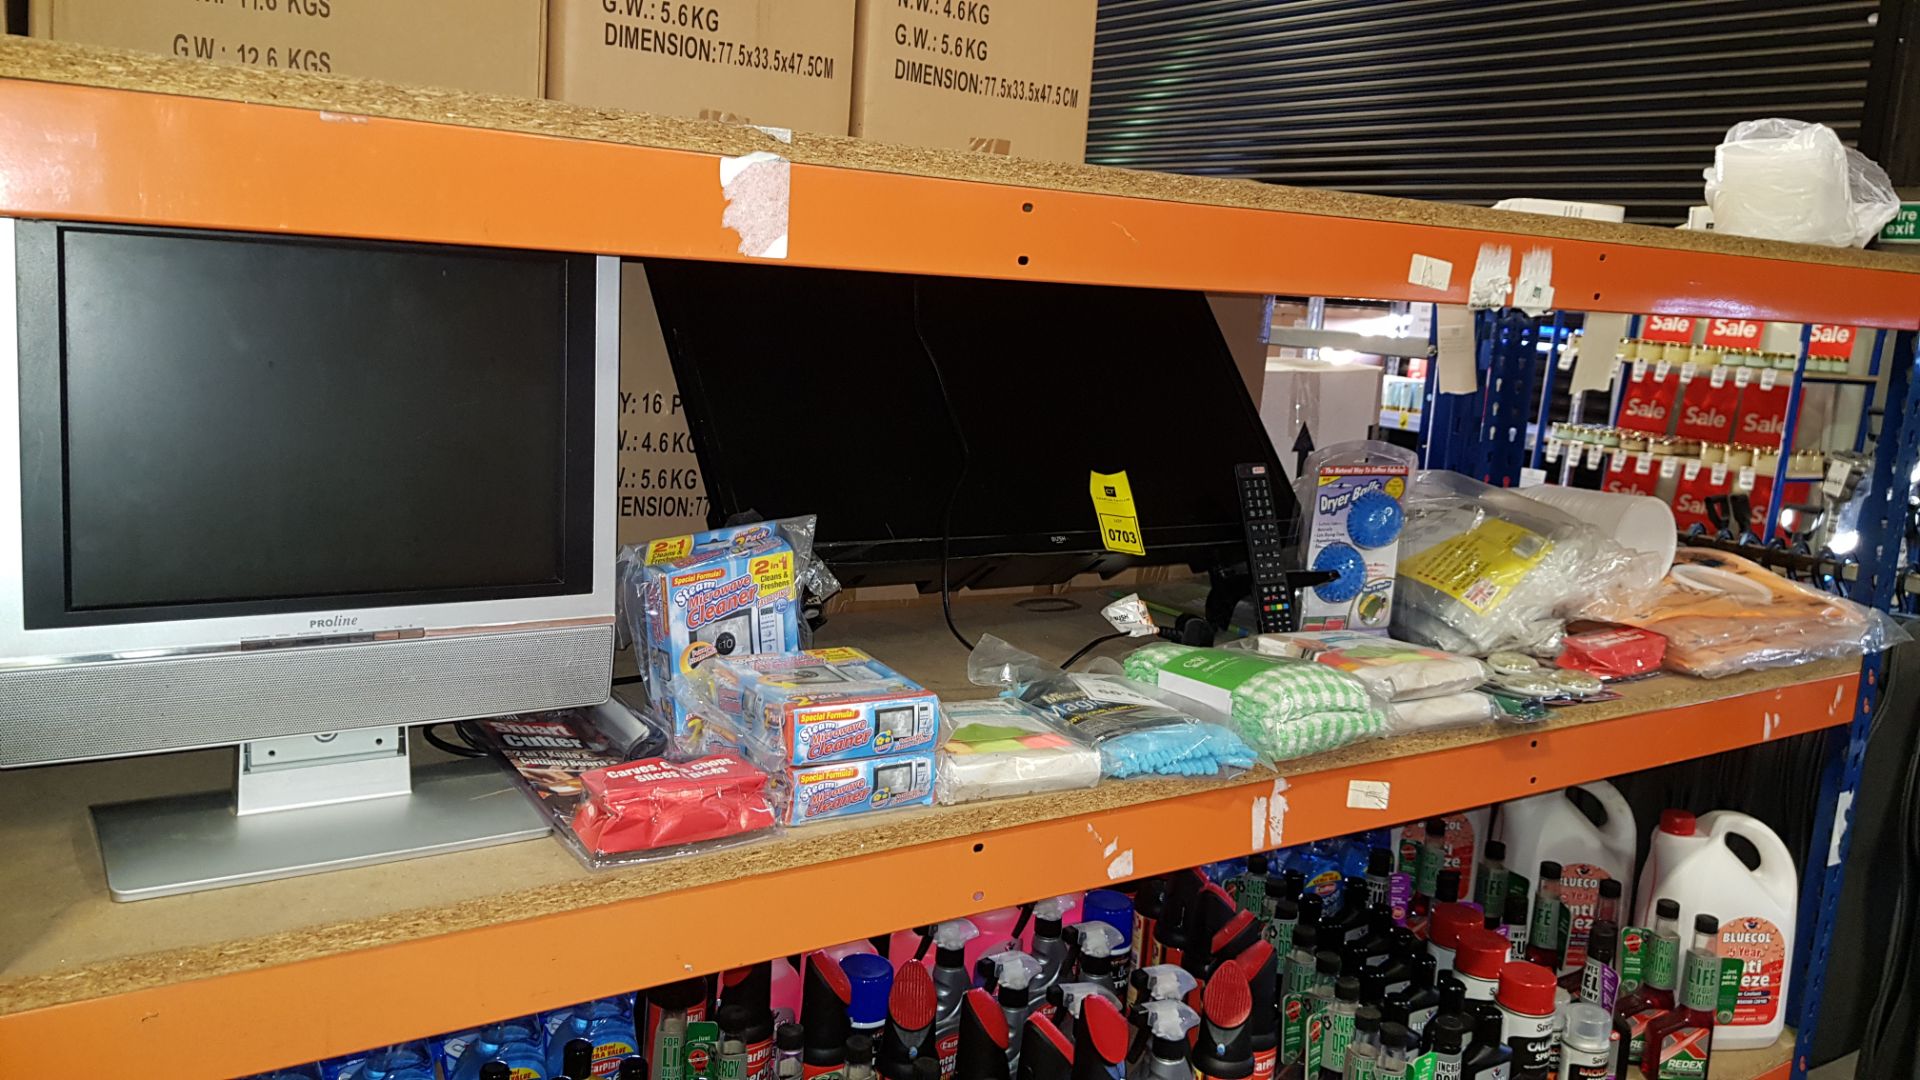 20+ PIECE MIXED CLEANING AND ELECTRONIC LOT CONTAINING BUSH TV, PROLINE TV, VARIOUS CLEANING